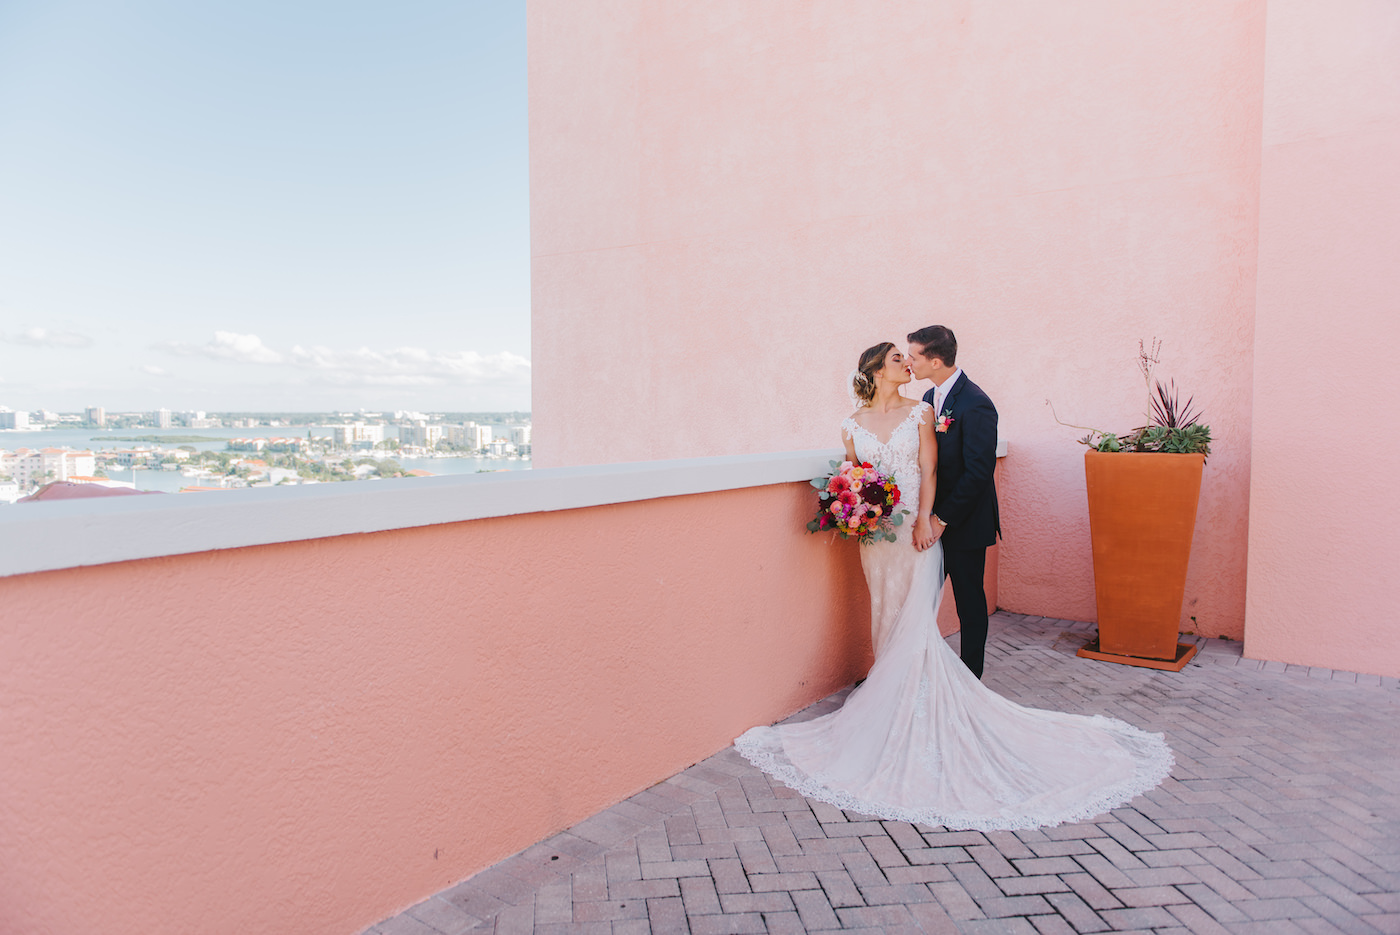 Bride and Groom Portrait at Clearwater Wedding Venue Hyatt Regency Beach Hotel | Bright Tropical Colorful Wedding Bouquet | Ivory and Champagne Lilian West Sheath Wedding Dress Bridal Gown with V Neck Off The Shoulder Straps, Scalloped Edge Train | Tampa Bay Wedding Photographer Kera Photography